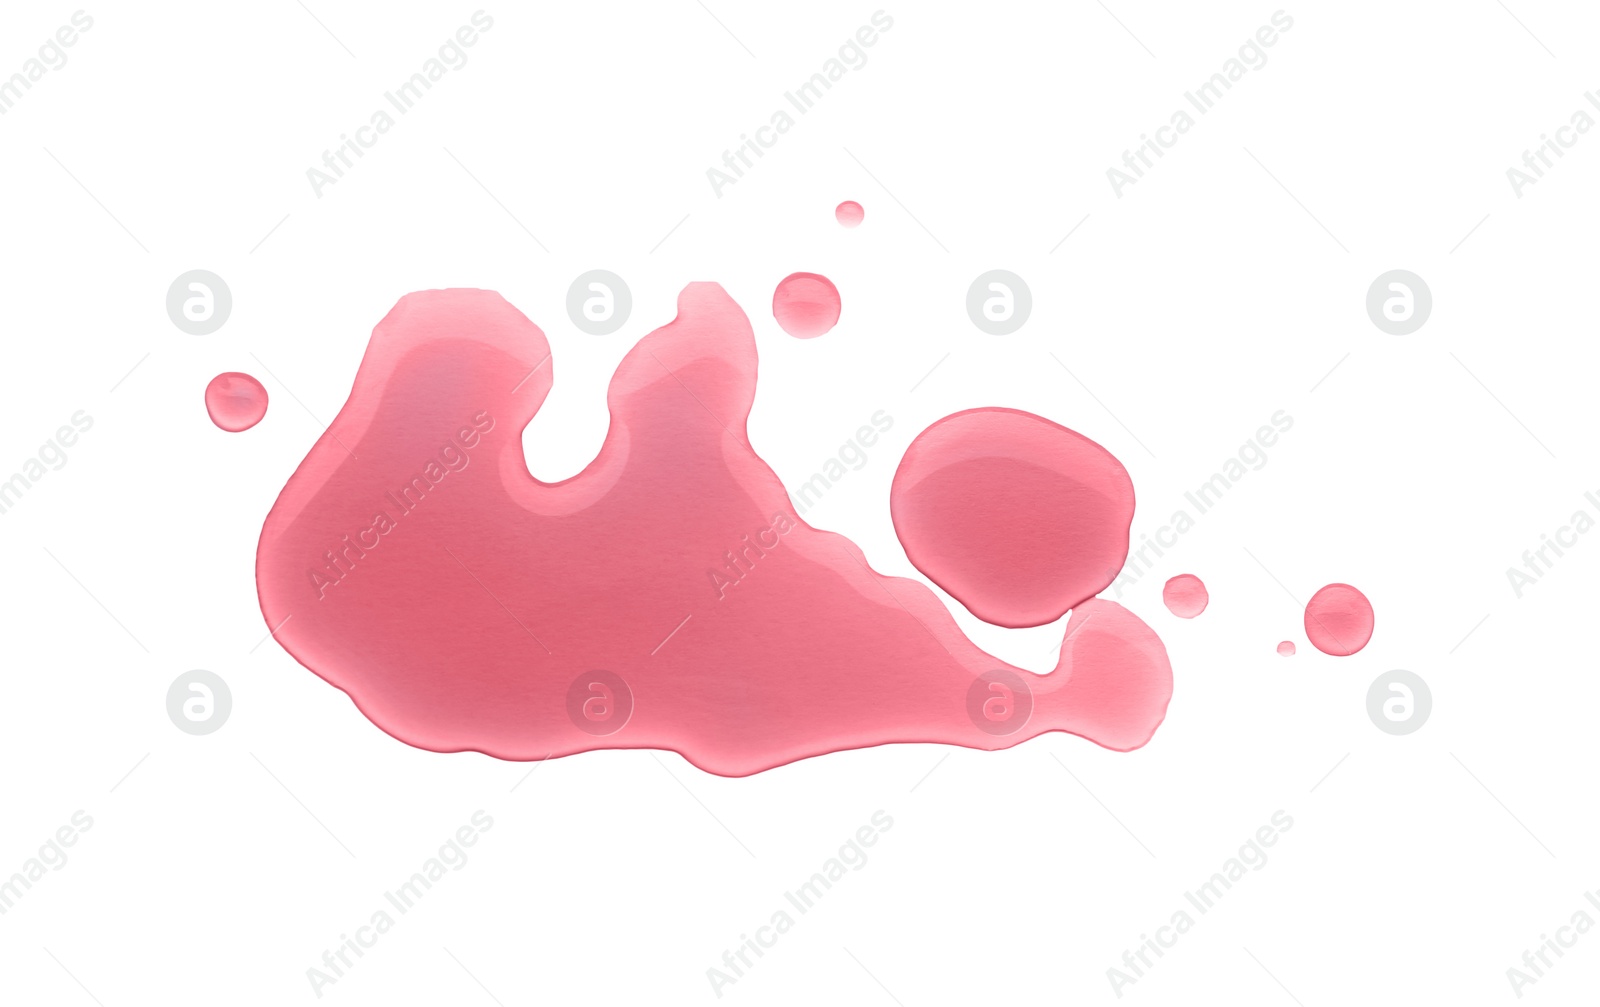 Photo of Puddle of red liquid on white background, top view